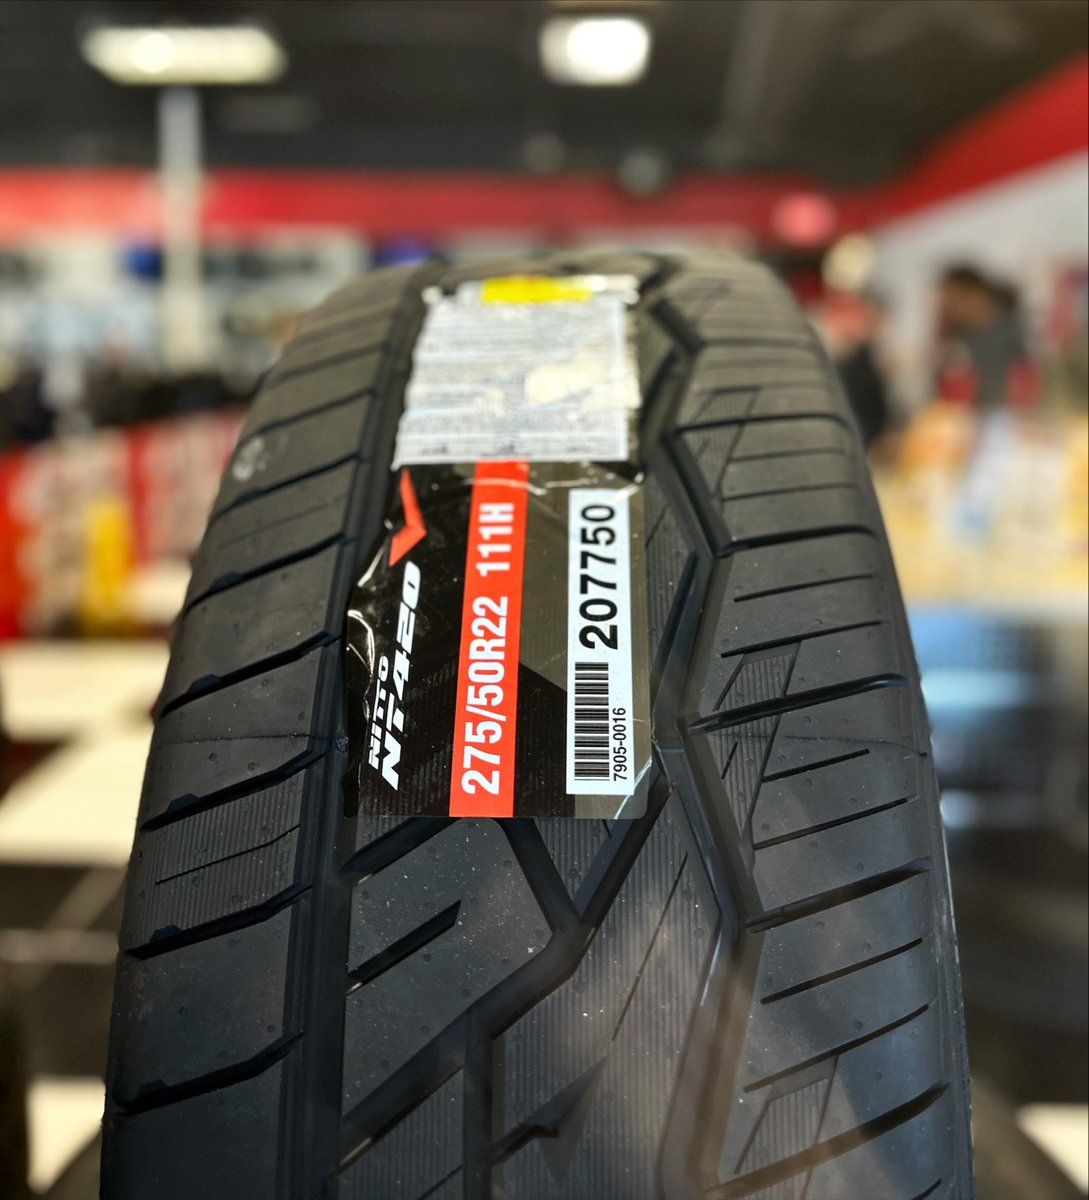 It's #TireThursday! Today, we're highlighting these Nitto Tire USA NT420V! #NittoTire #NittoTires